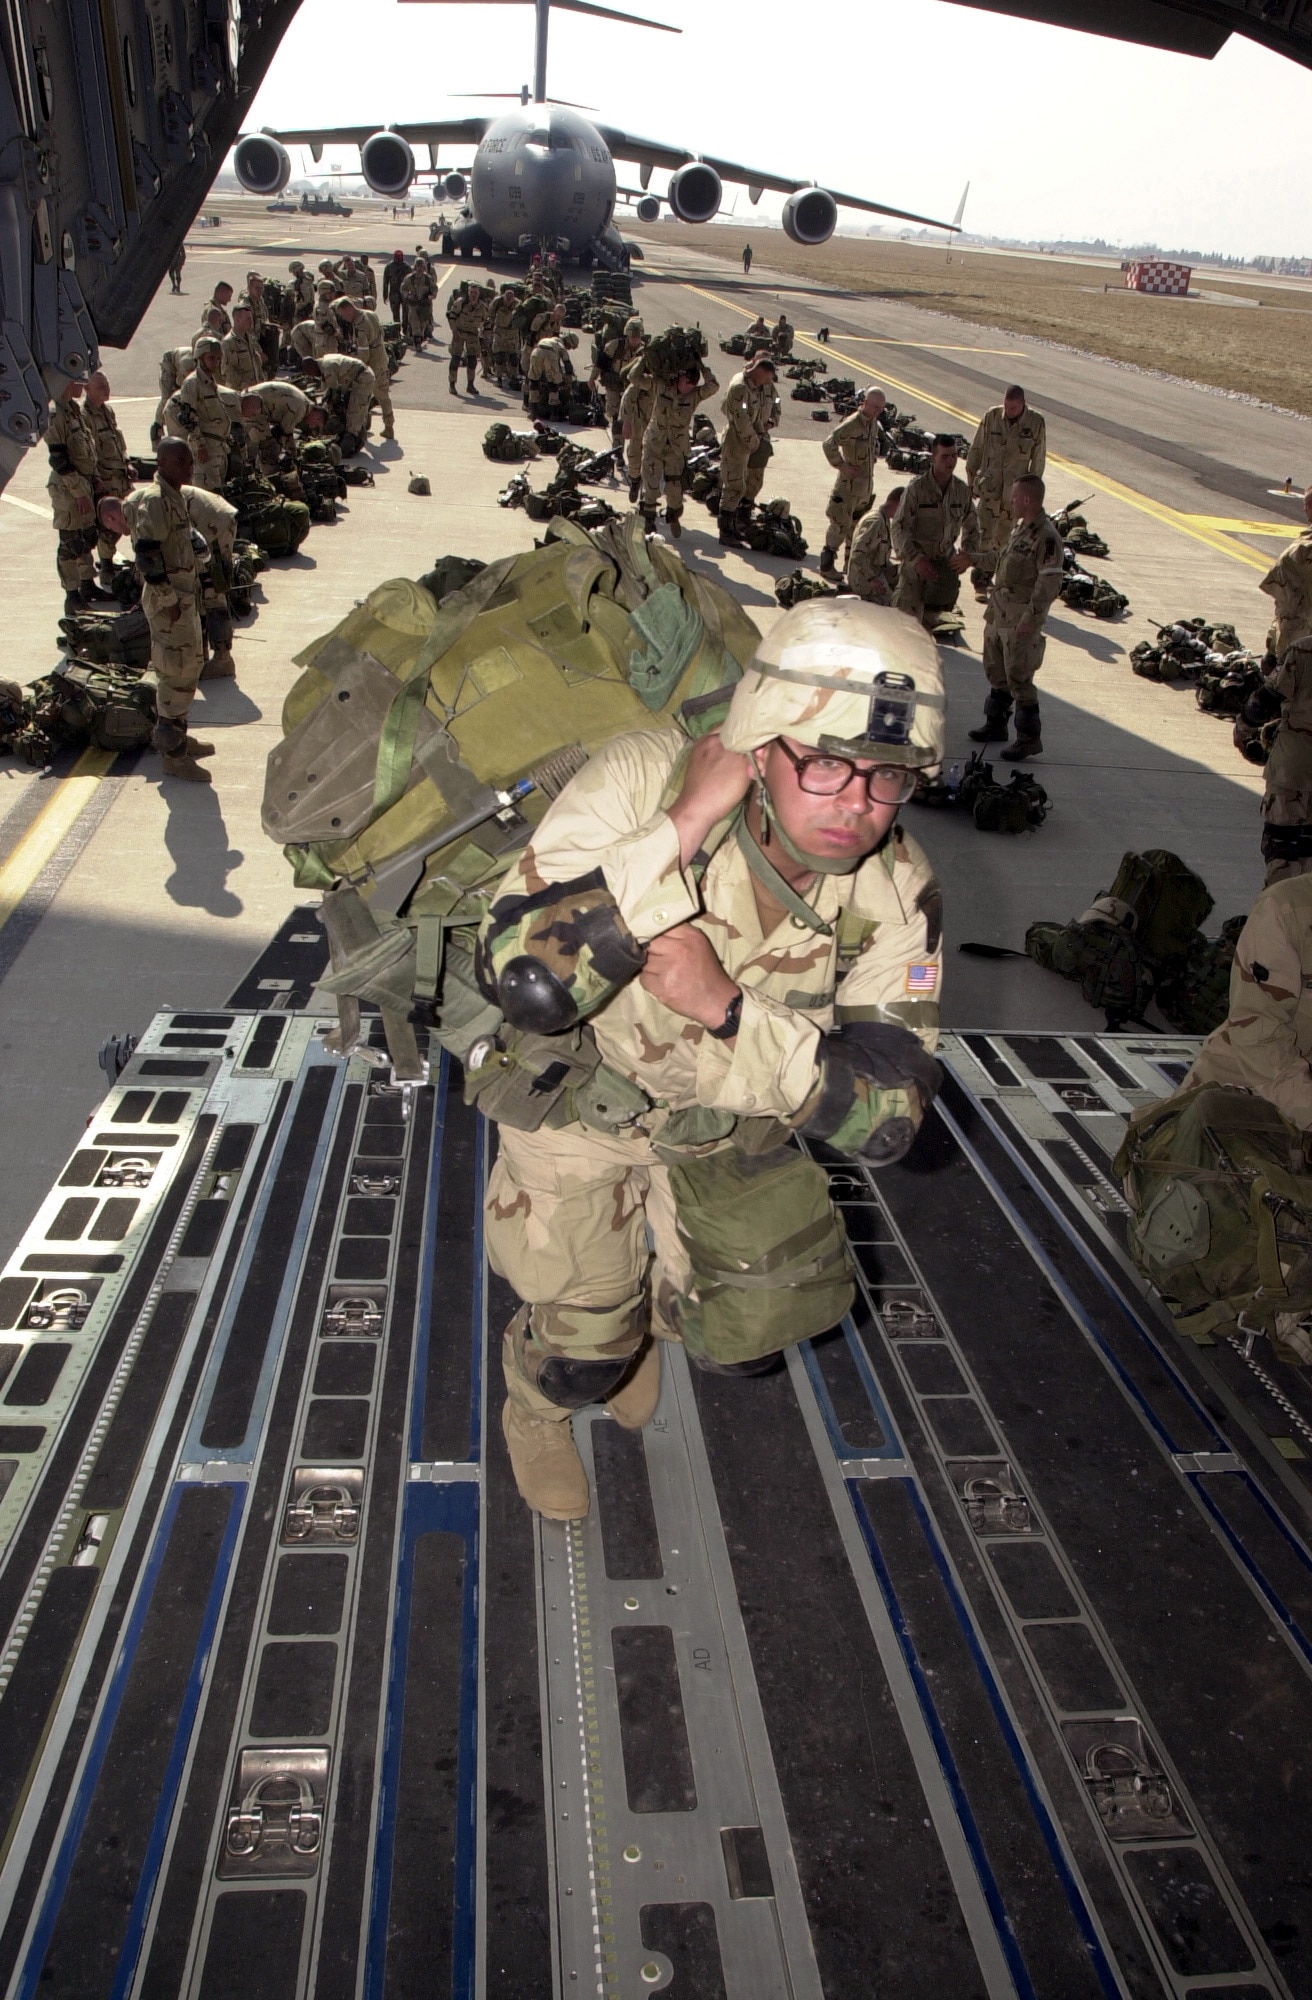 OPERATION IRAQI FREEDOM -- A soldier boards a C-17 Globemaster III.  Nearly 1,000 "Sky Soldiers" of the 173rd Airborne Brigade parachuted from C-17s into the Kurdish-controlled area of northern Iraq.  This was the first combat insertion of paratroopers using a C-17.  (U.S. Air Force photo by Airman 1st Class Isaac G. L. Freeman)